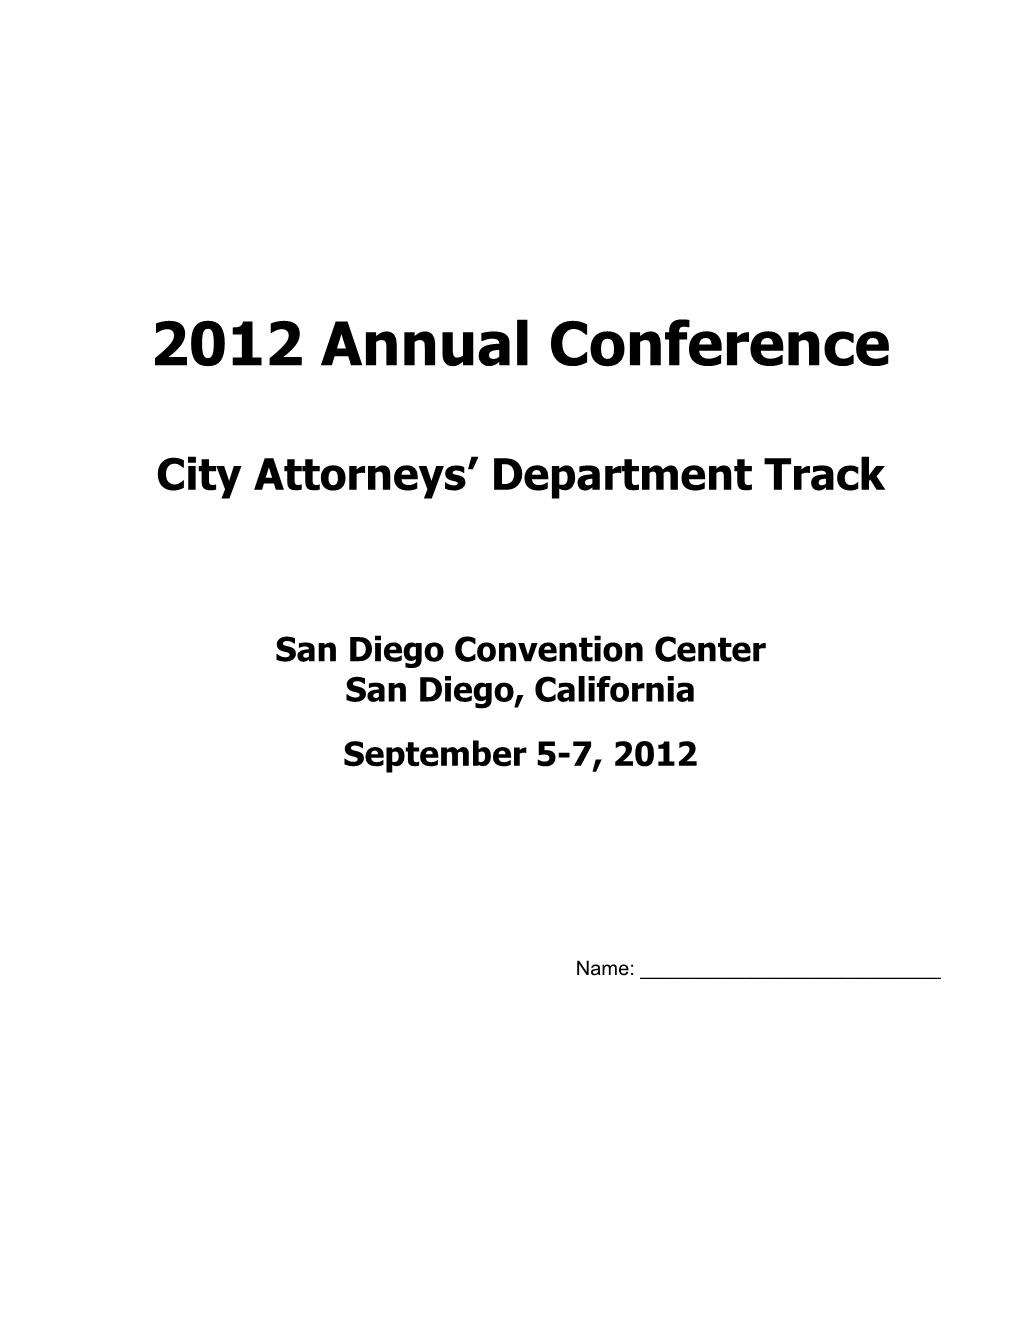 2012 Annual Conference